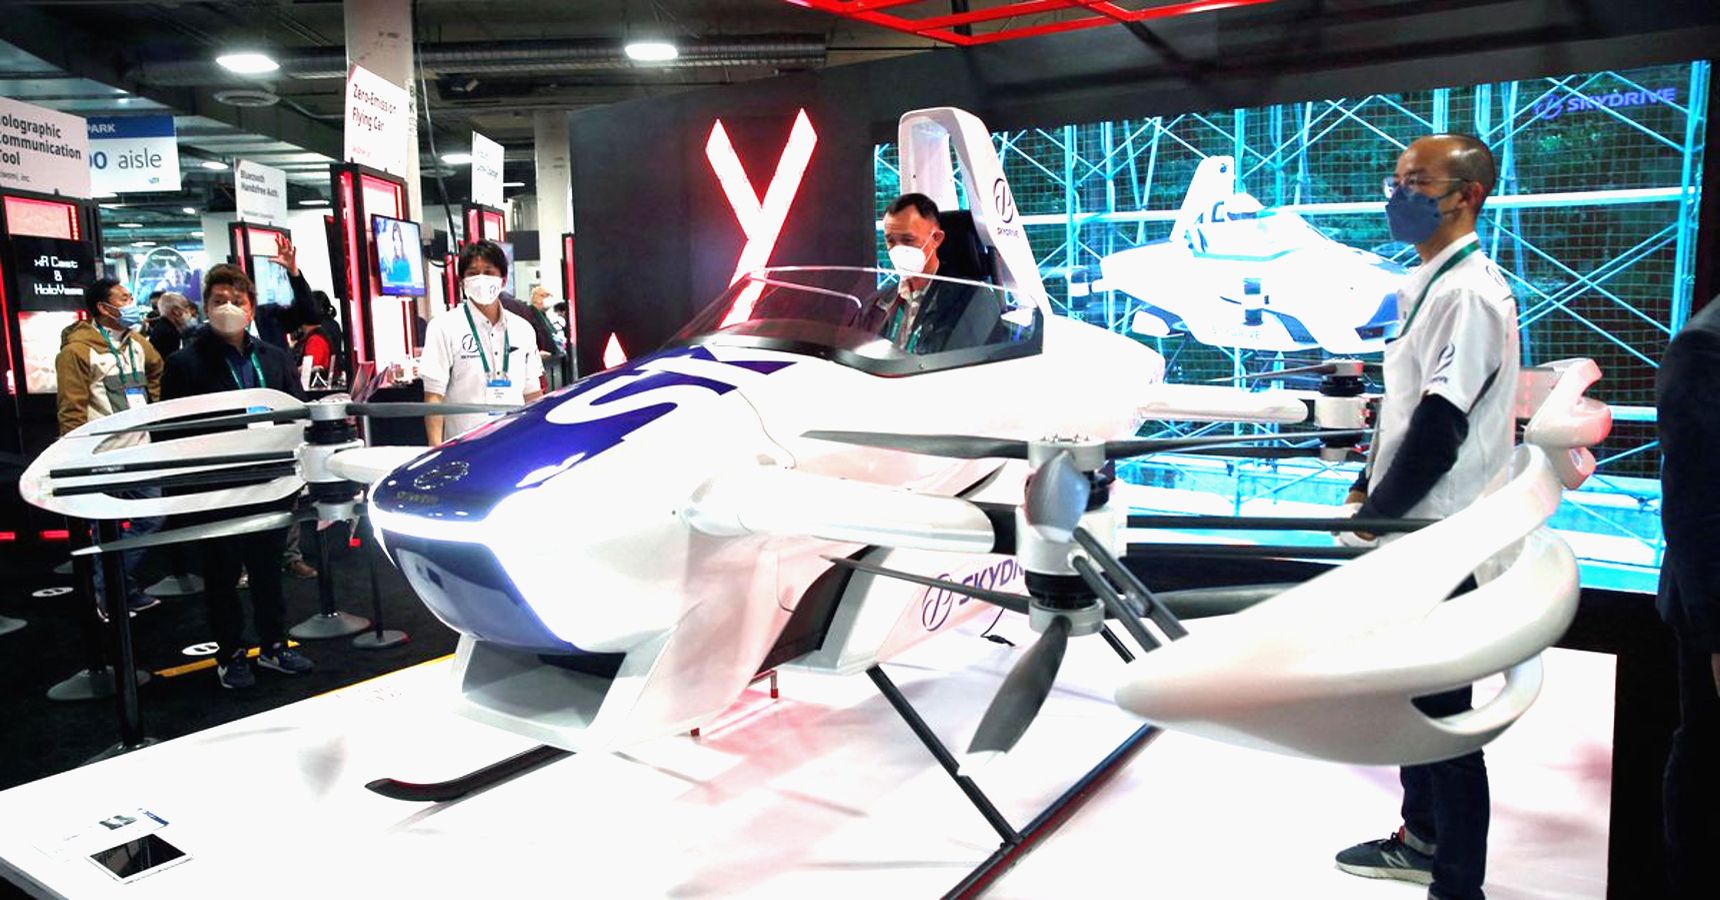 Suzuki and SkyDrive experts testing a demo flying car.